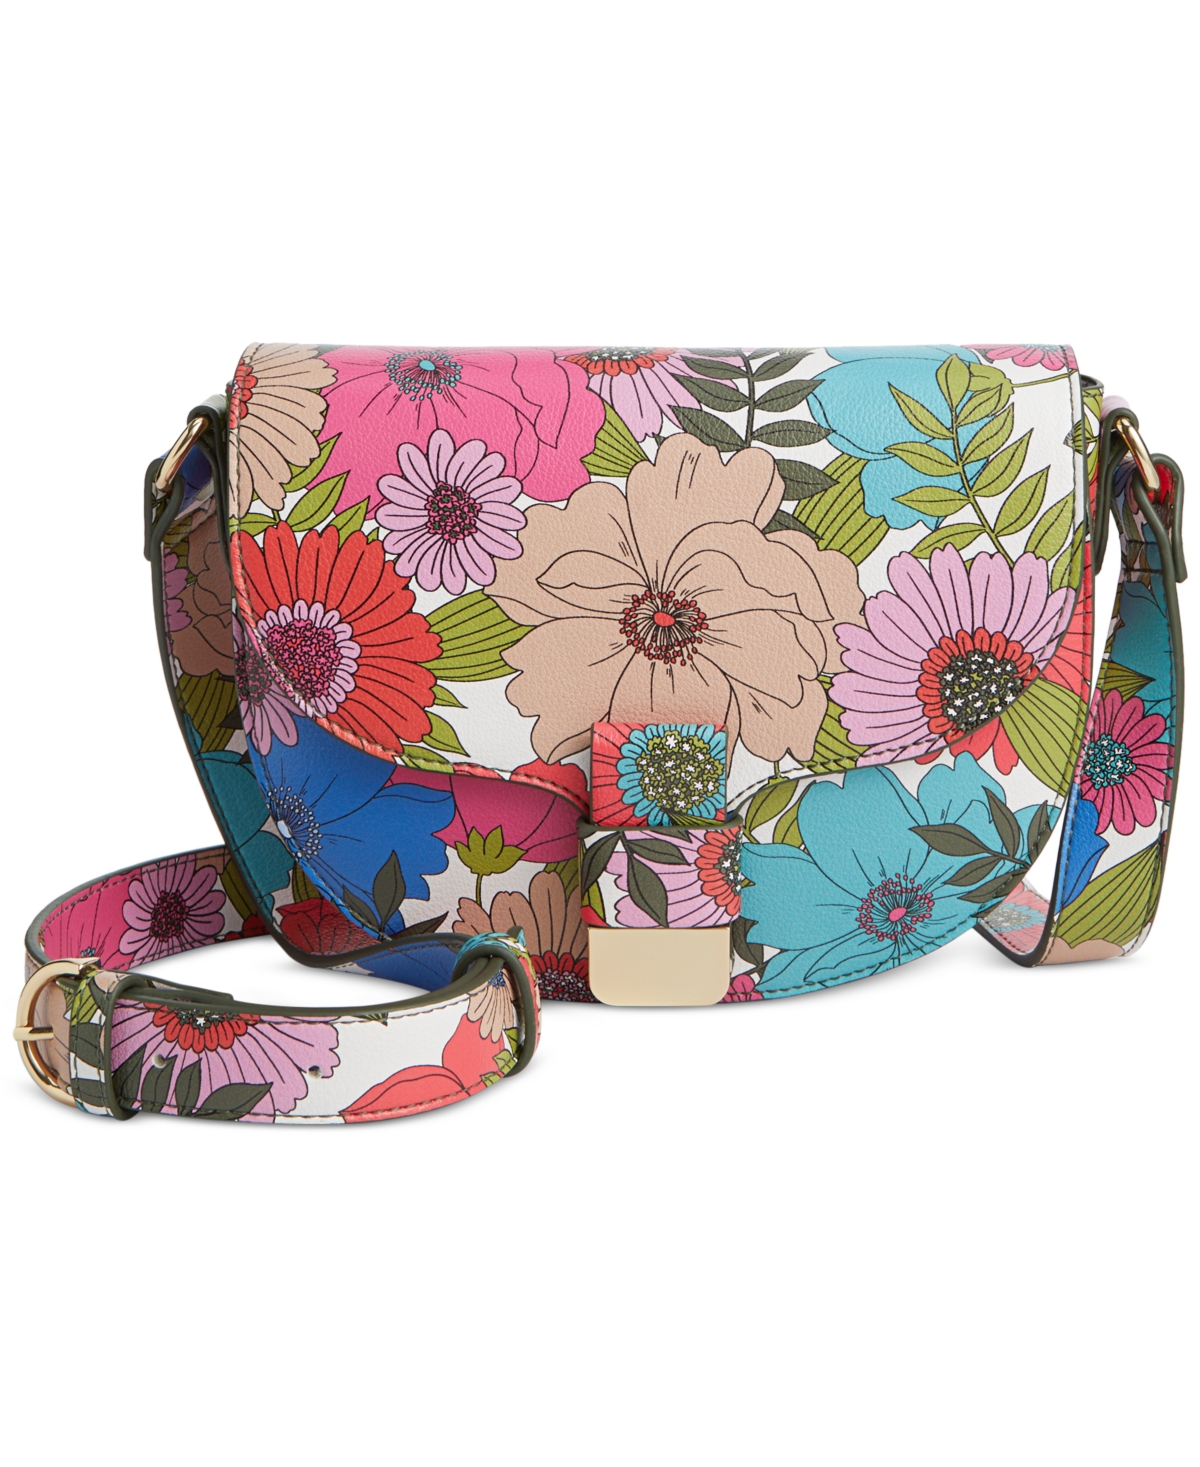 Holmme Printed Crossbody Bag, Created for Macy's - Botanical